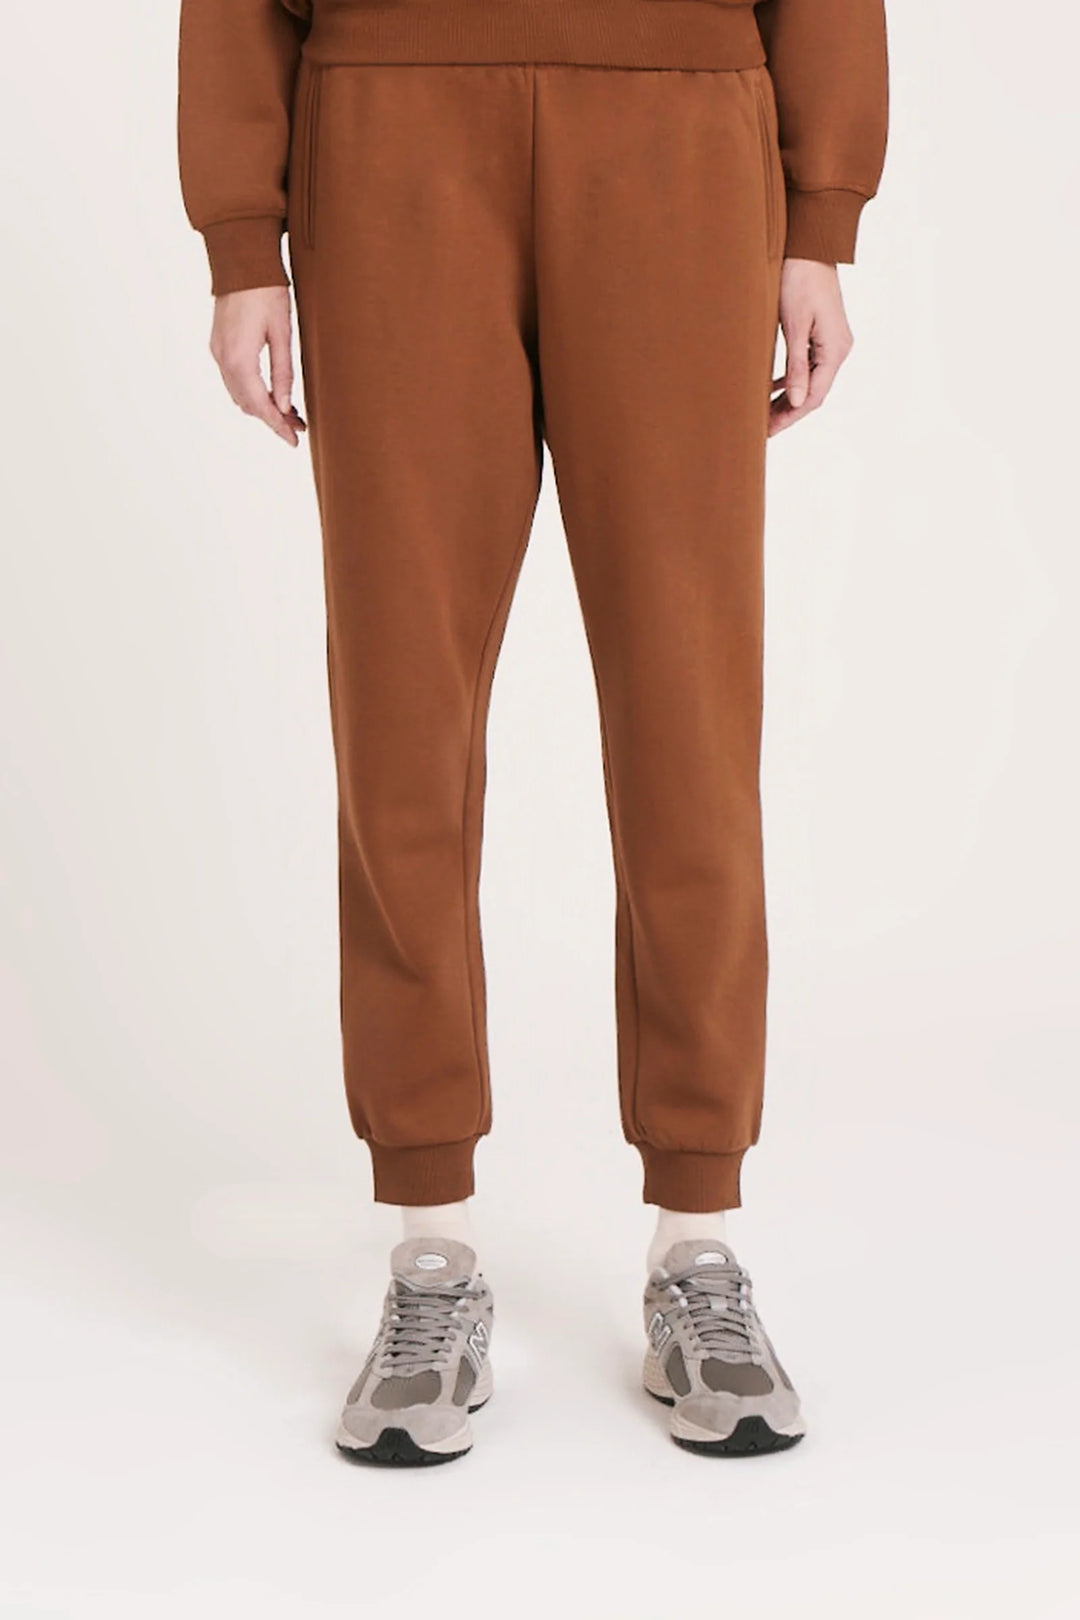 Nude Lucy Carter Classic Trackpant - Toffee